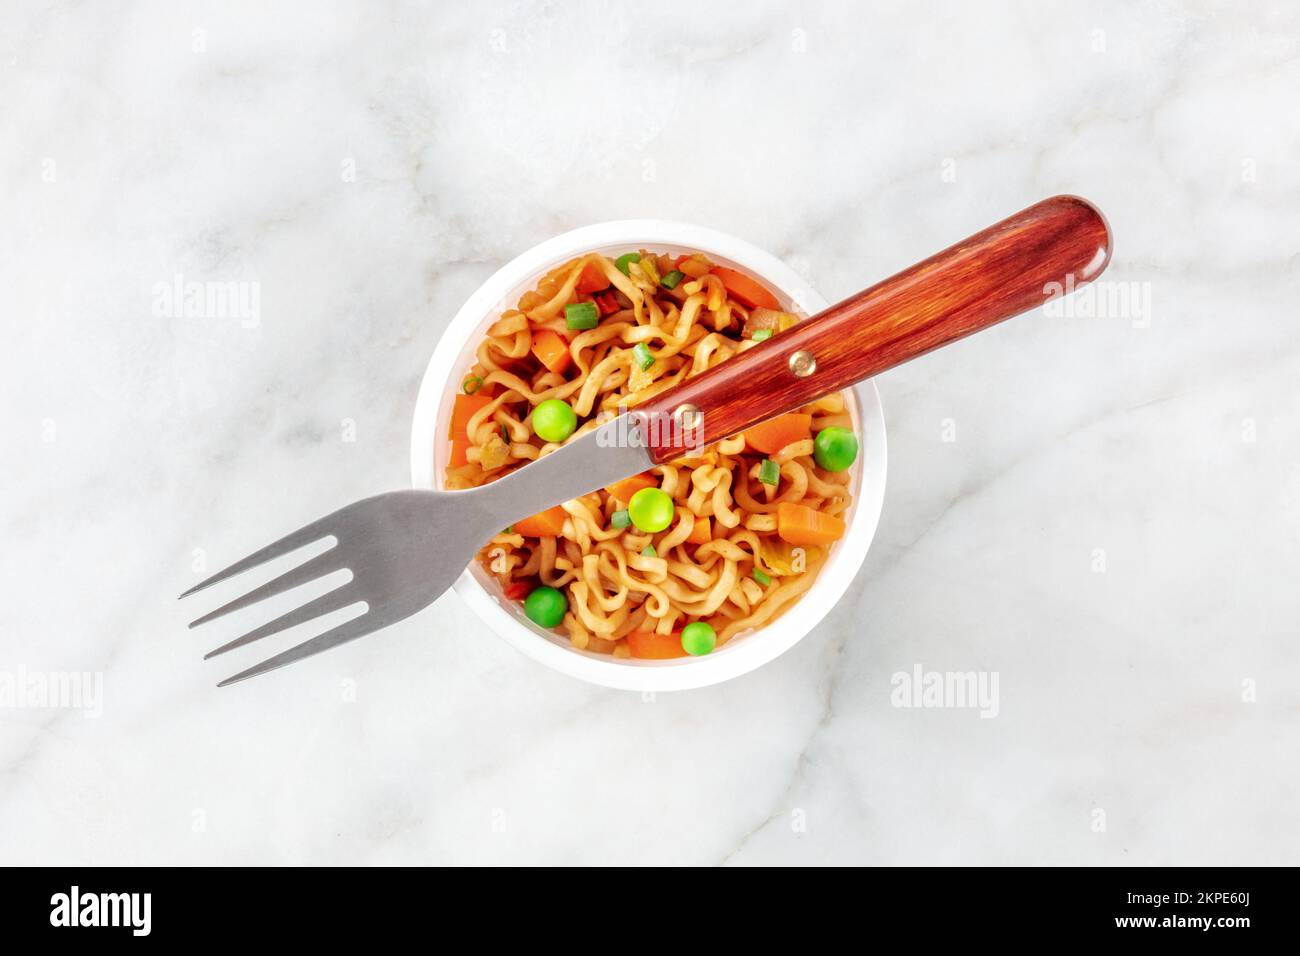 Ramen cup, instant soba noodles in a plastic cup with vegetables, green peas, onions, and carrots, top shot with a fork Stock Photo